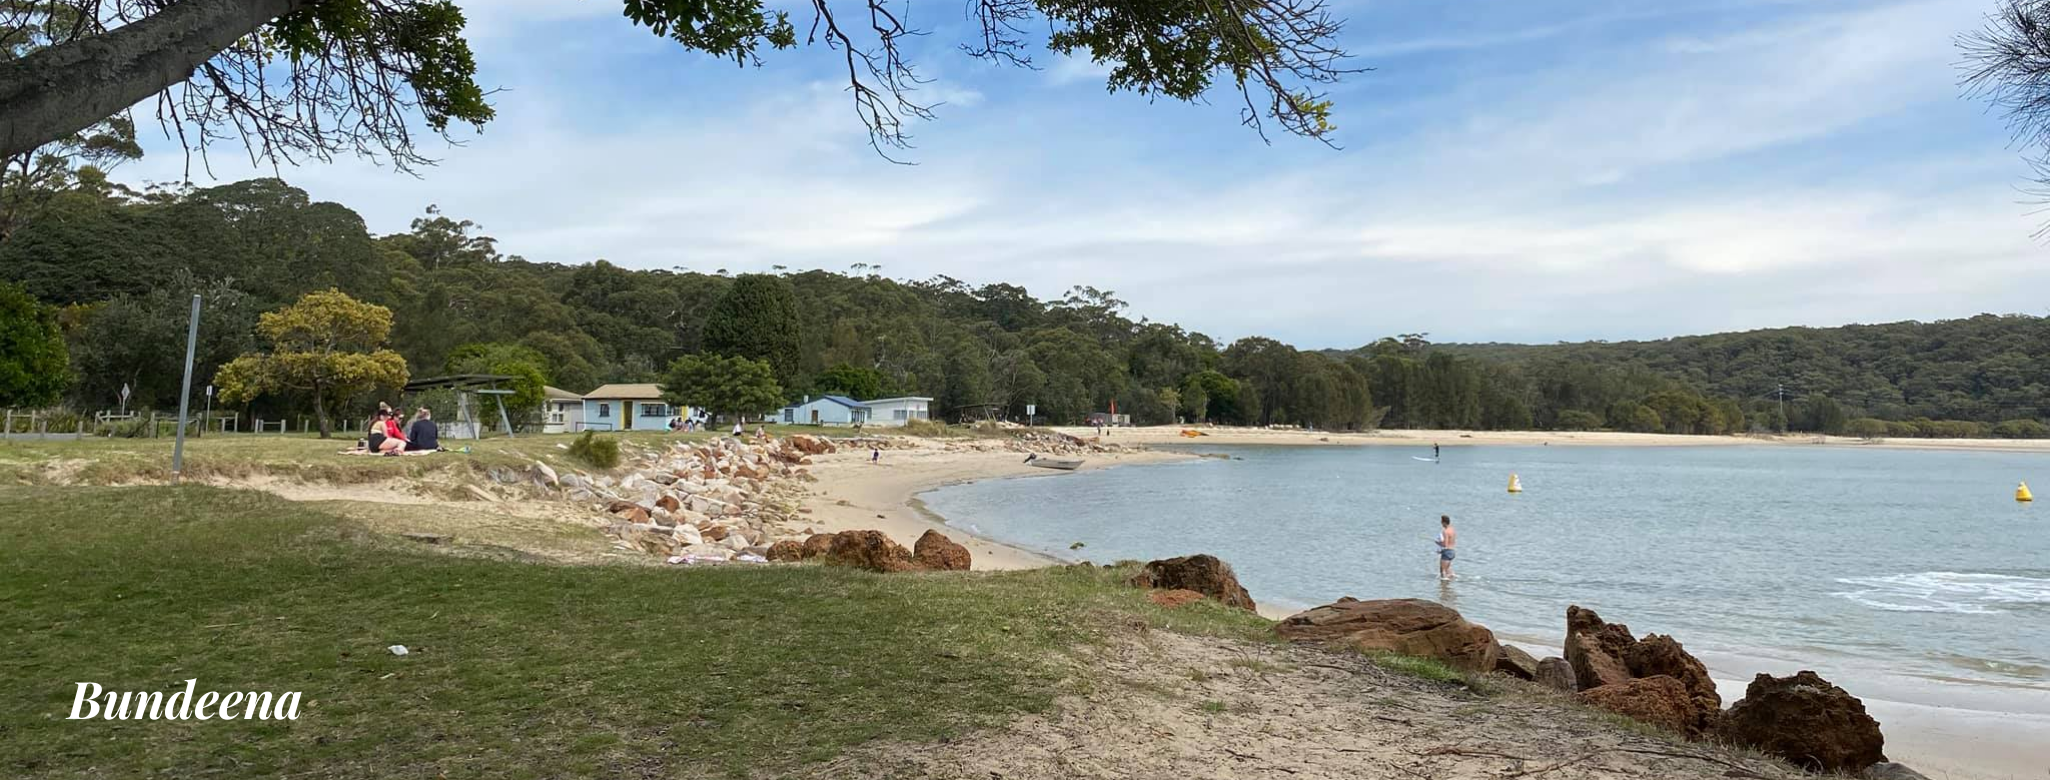 Best Beaches in Sydney for Kids | Family Friendly Beaches